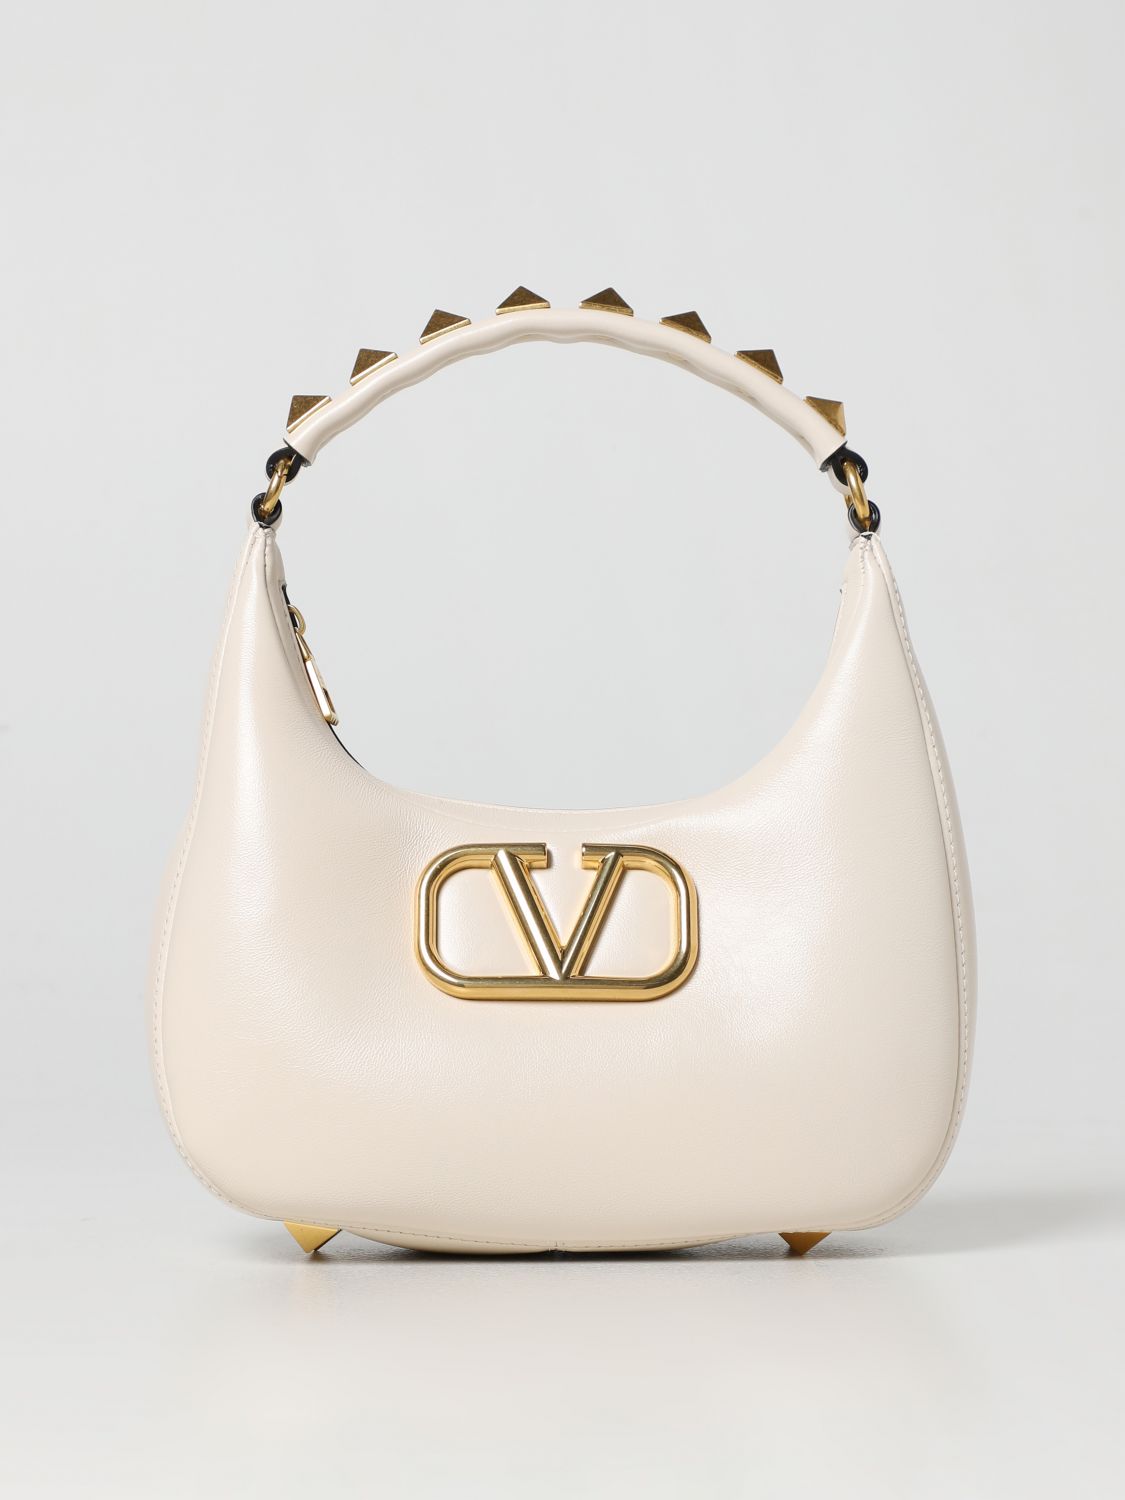 Vlogo Leather Hobo Bag In Grainy Calfskin for Woman in Ivory